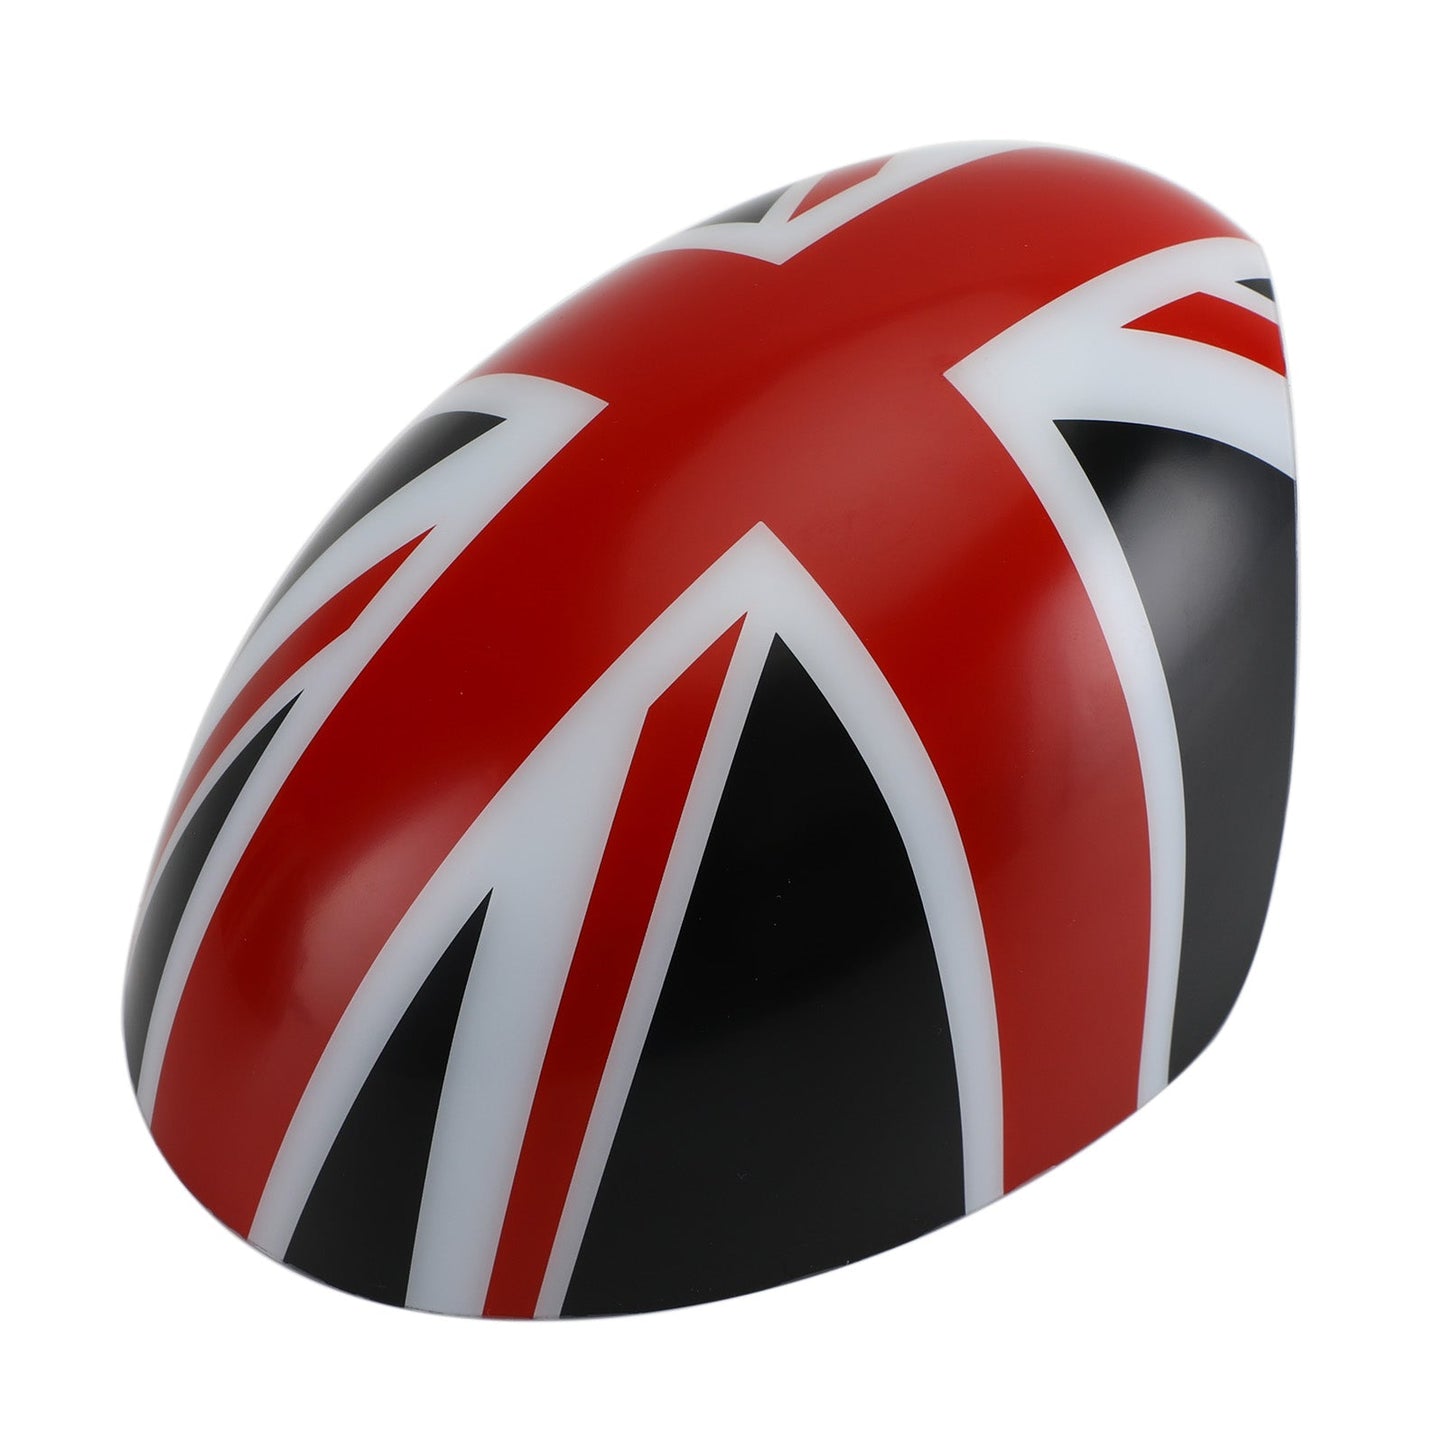 2 x Union Jack UK Flag Mirror Covers for MINI Cooper R55 R56 R57 Black/Red